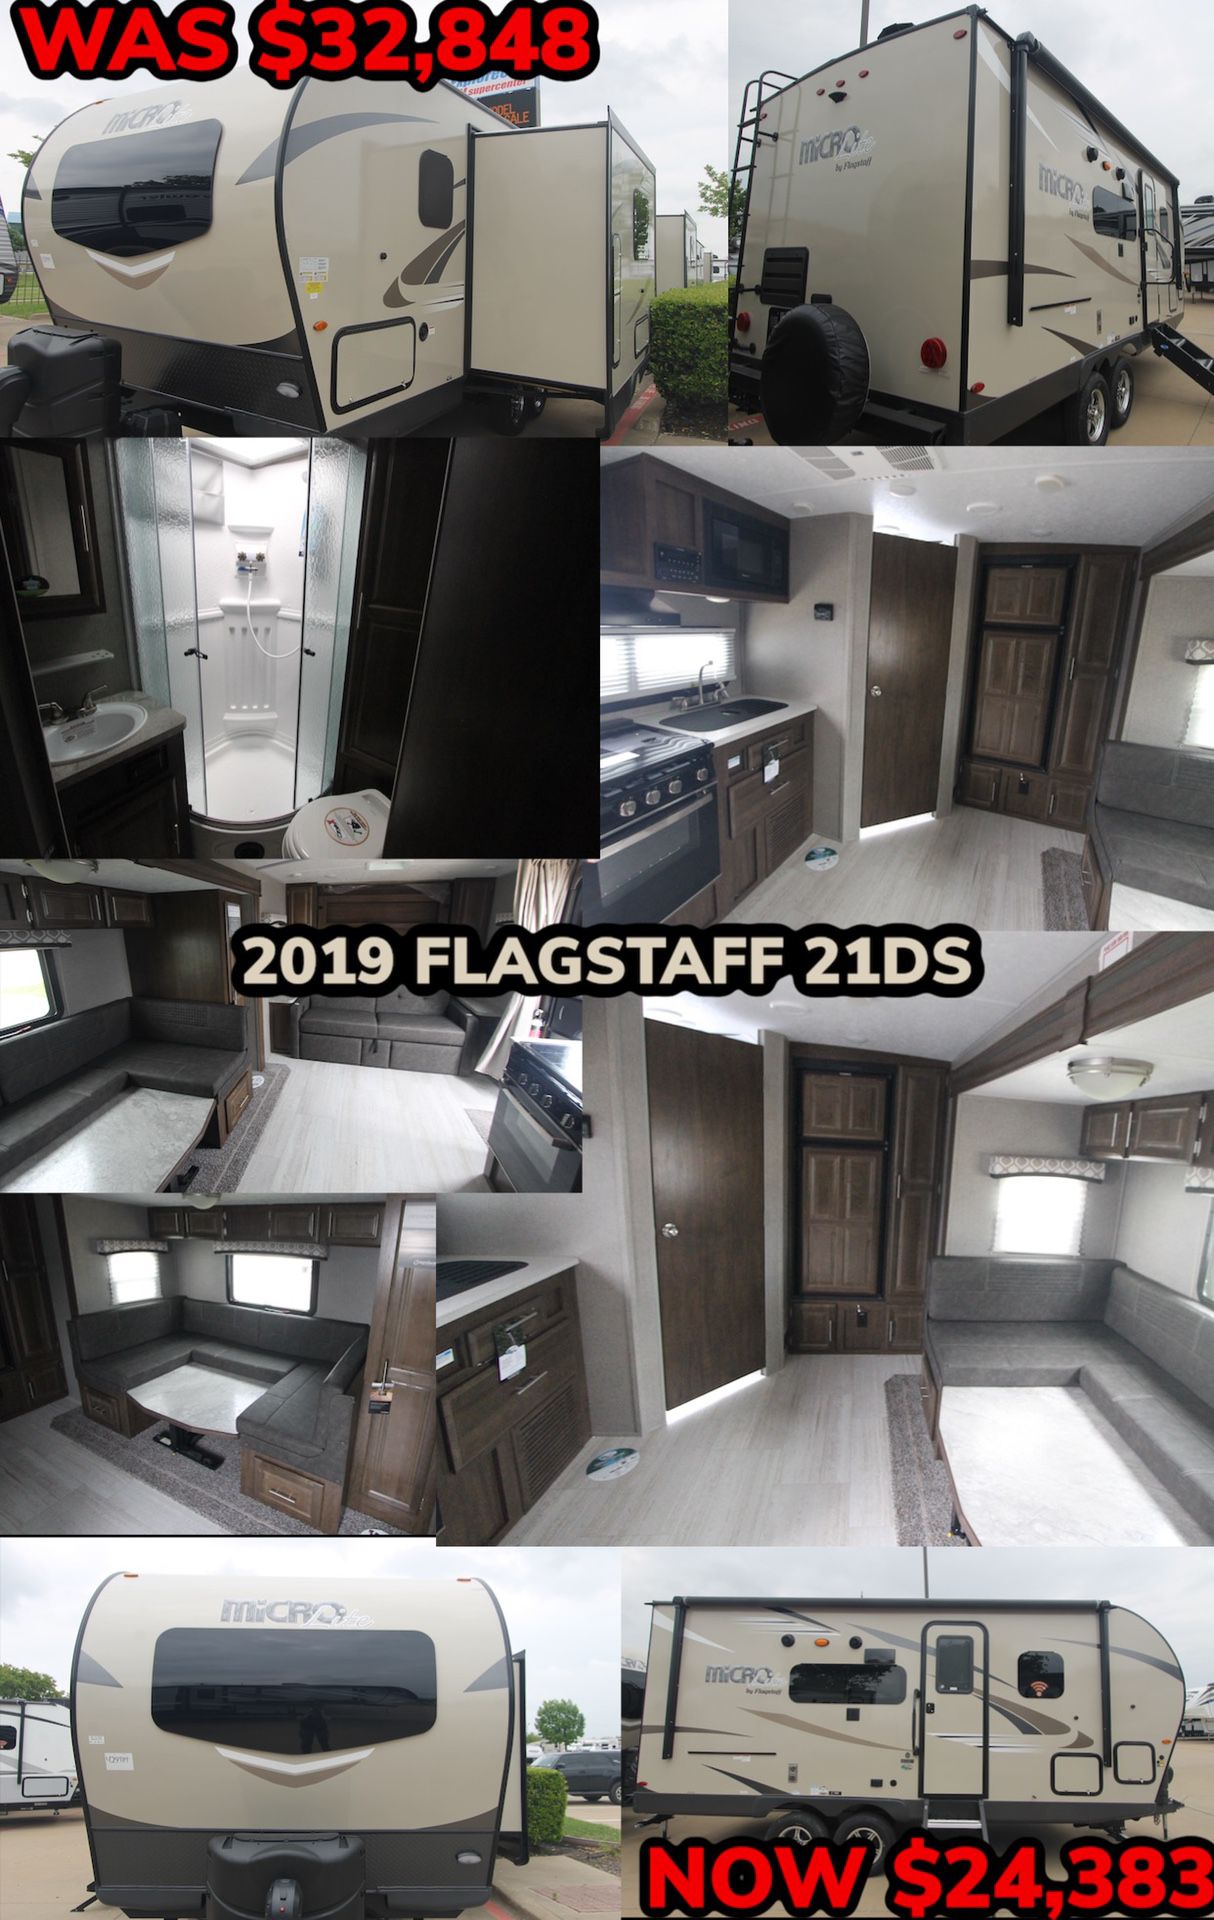 END OF THE YEAR CLEARANCE SALE!! 2019 FLAGSTAFF 21DS